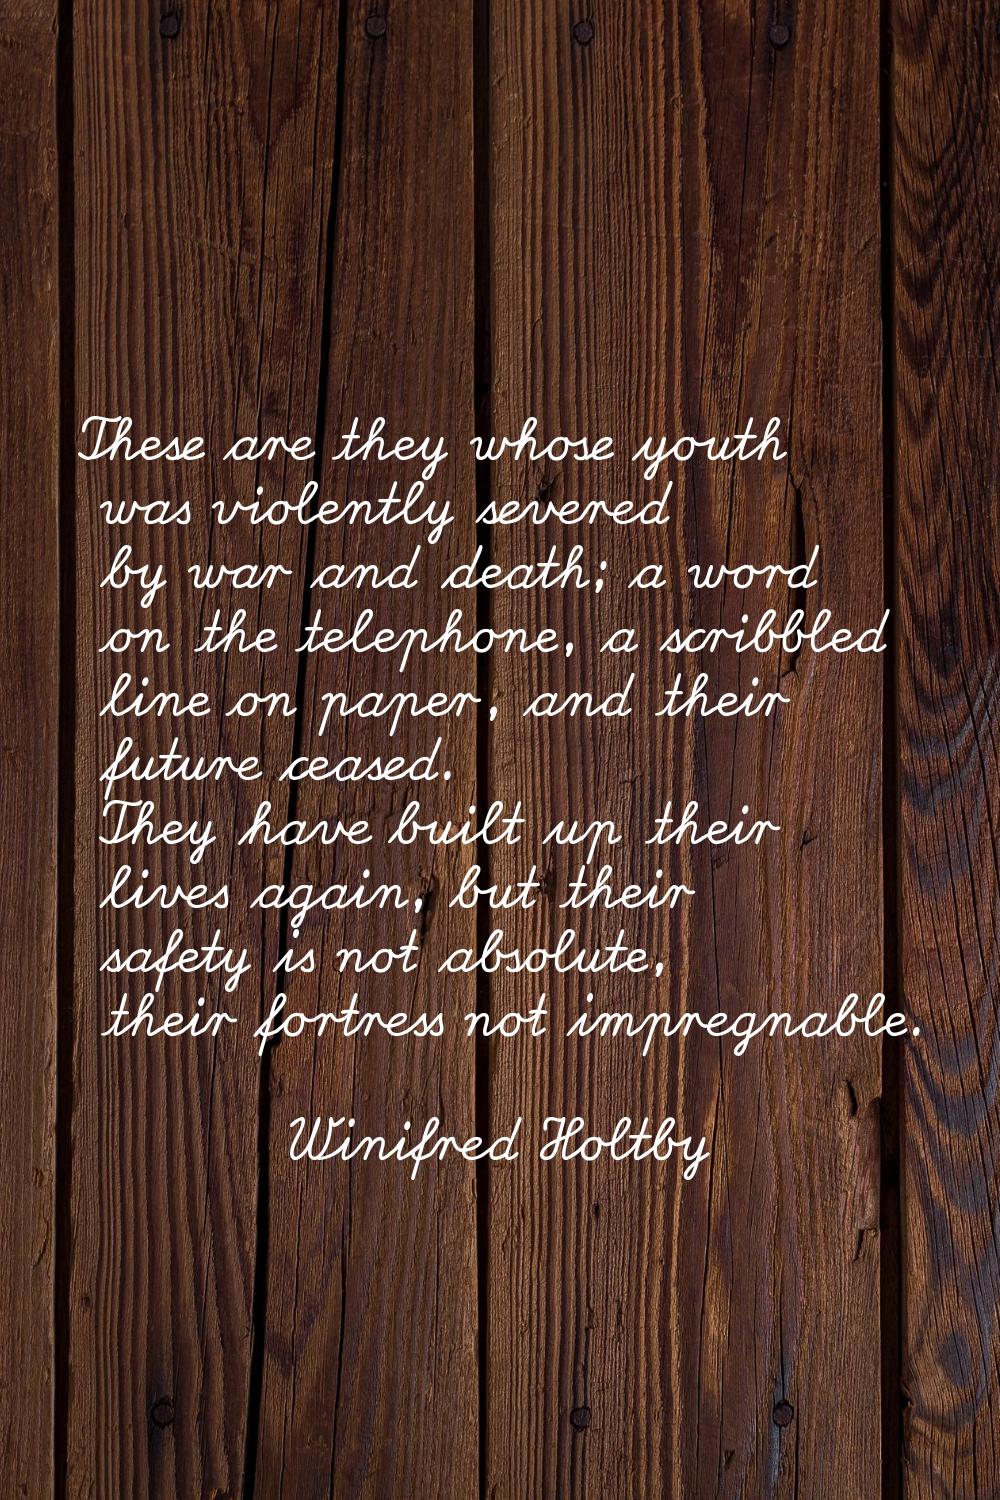 These are they whose youth was violently severed by war and death; a word on the telephone, a scrib